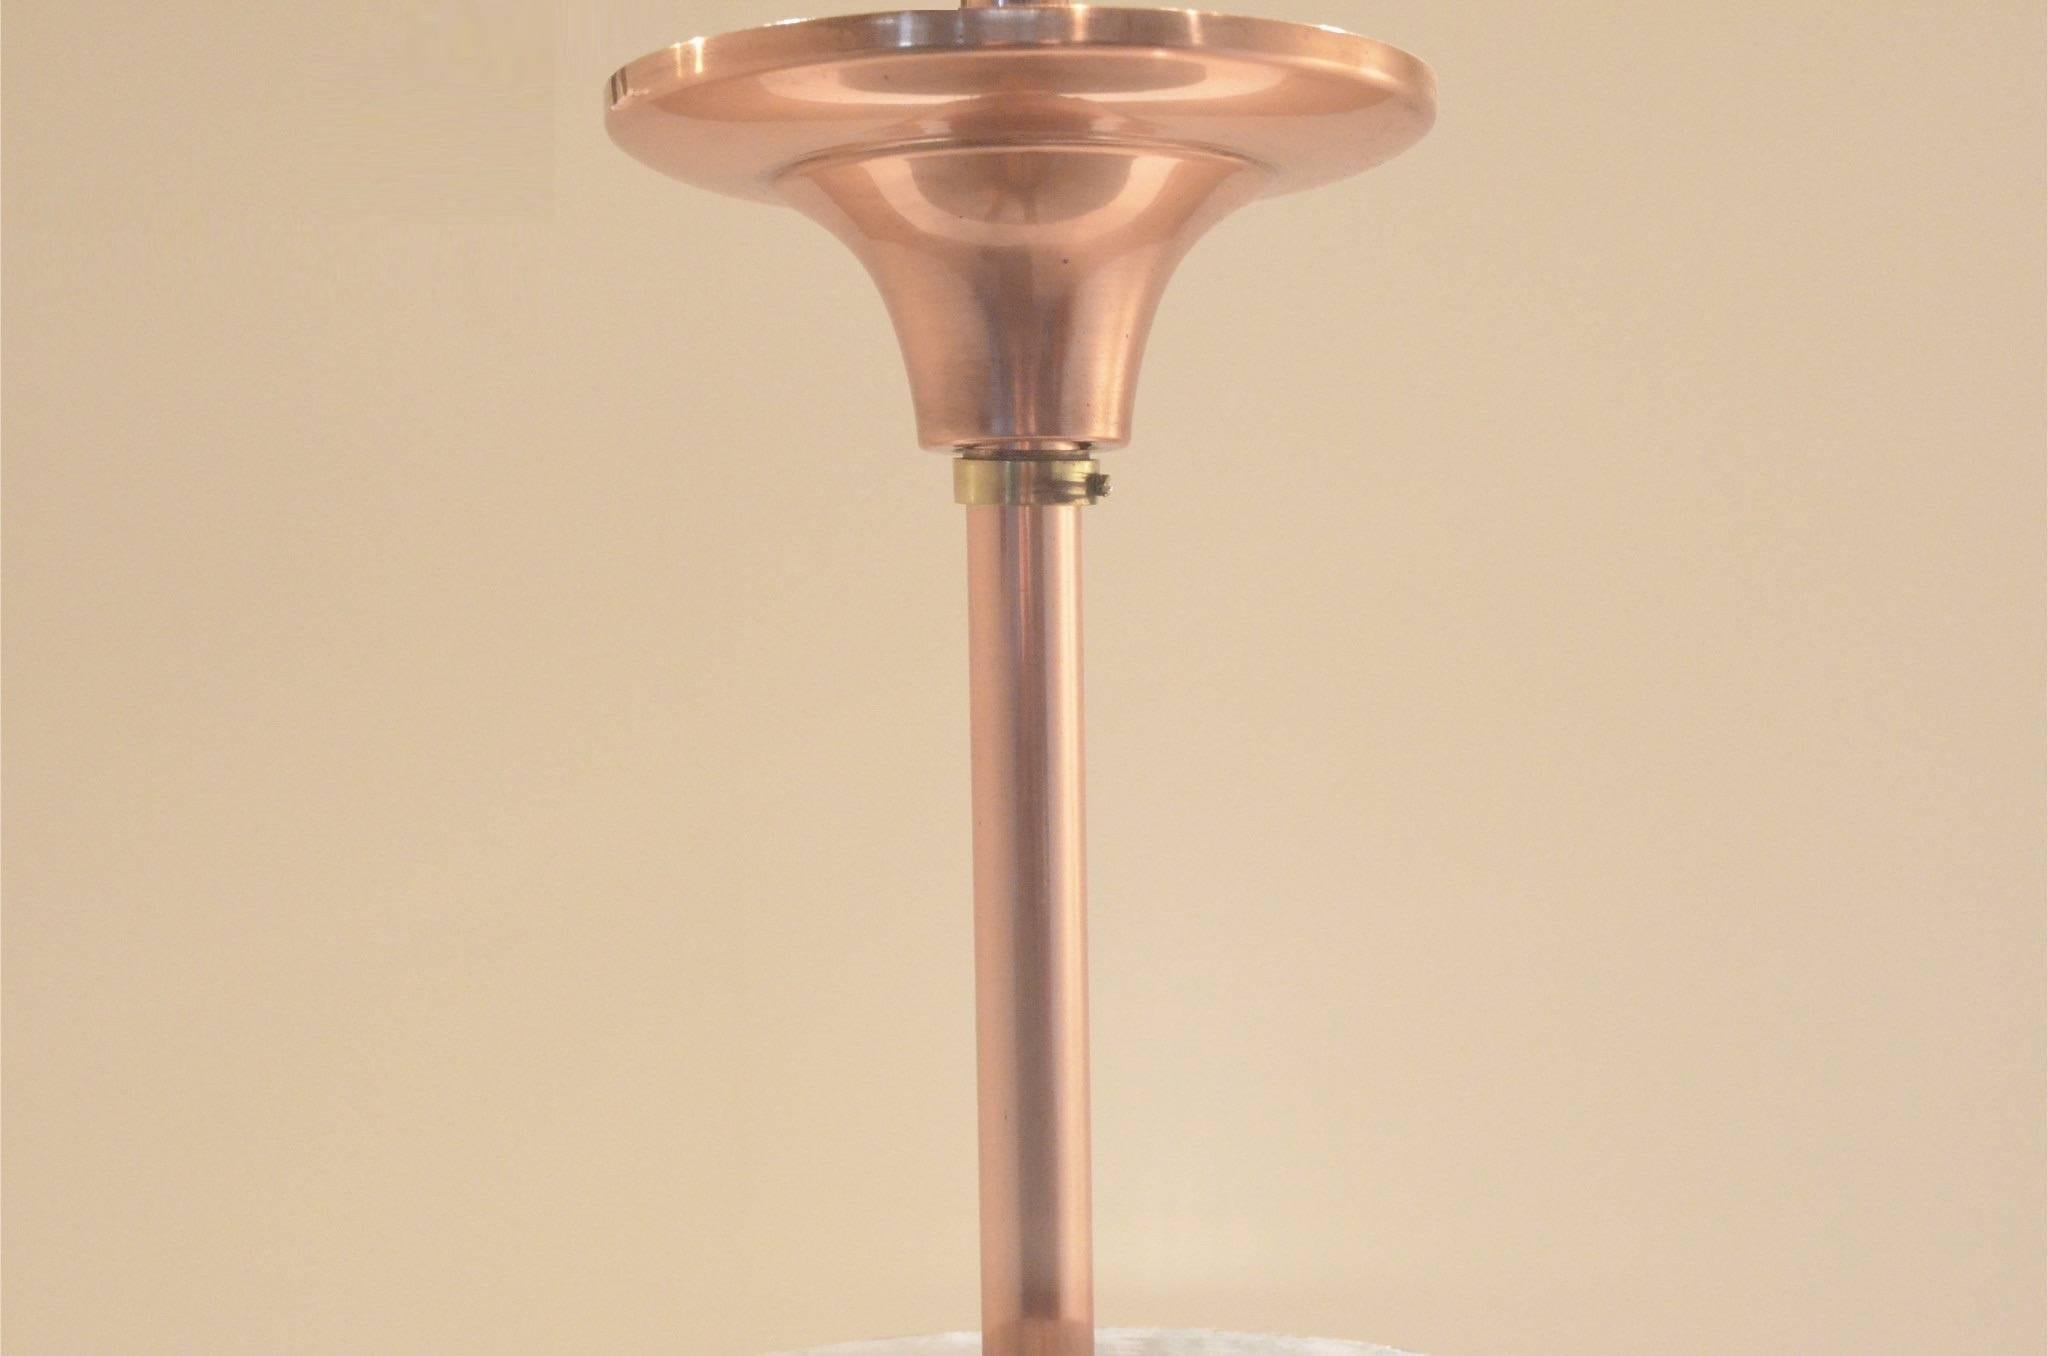 Decorative Art Deco period pendant lamp, layered full copper structure matched with round sanded glass diffusers.